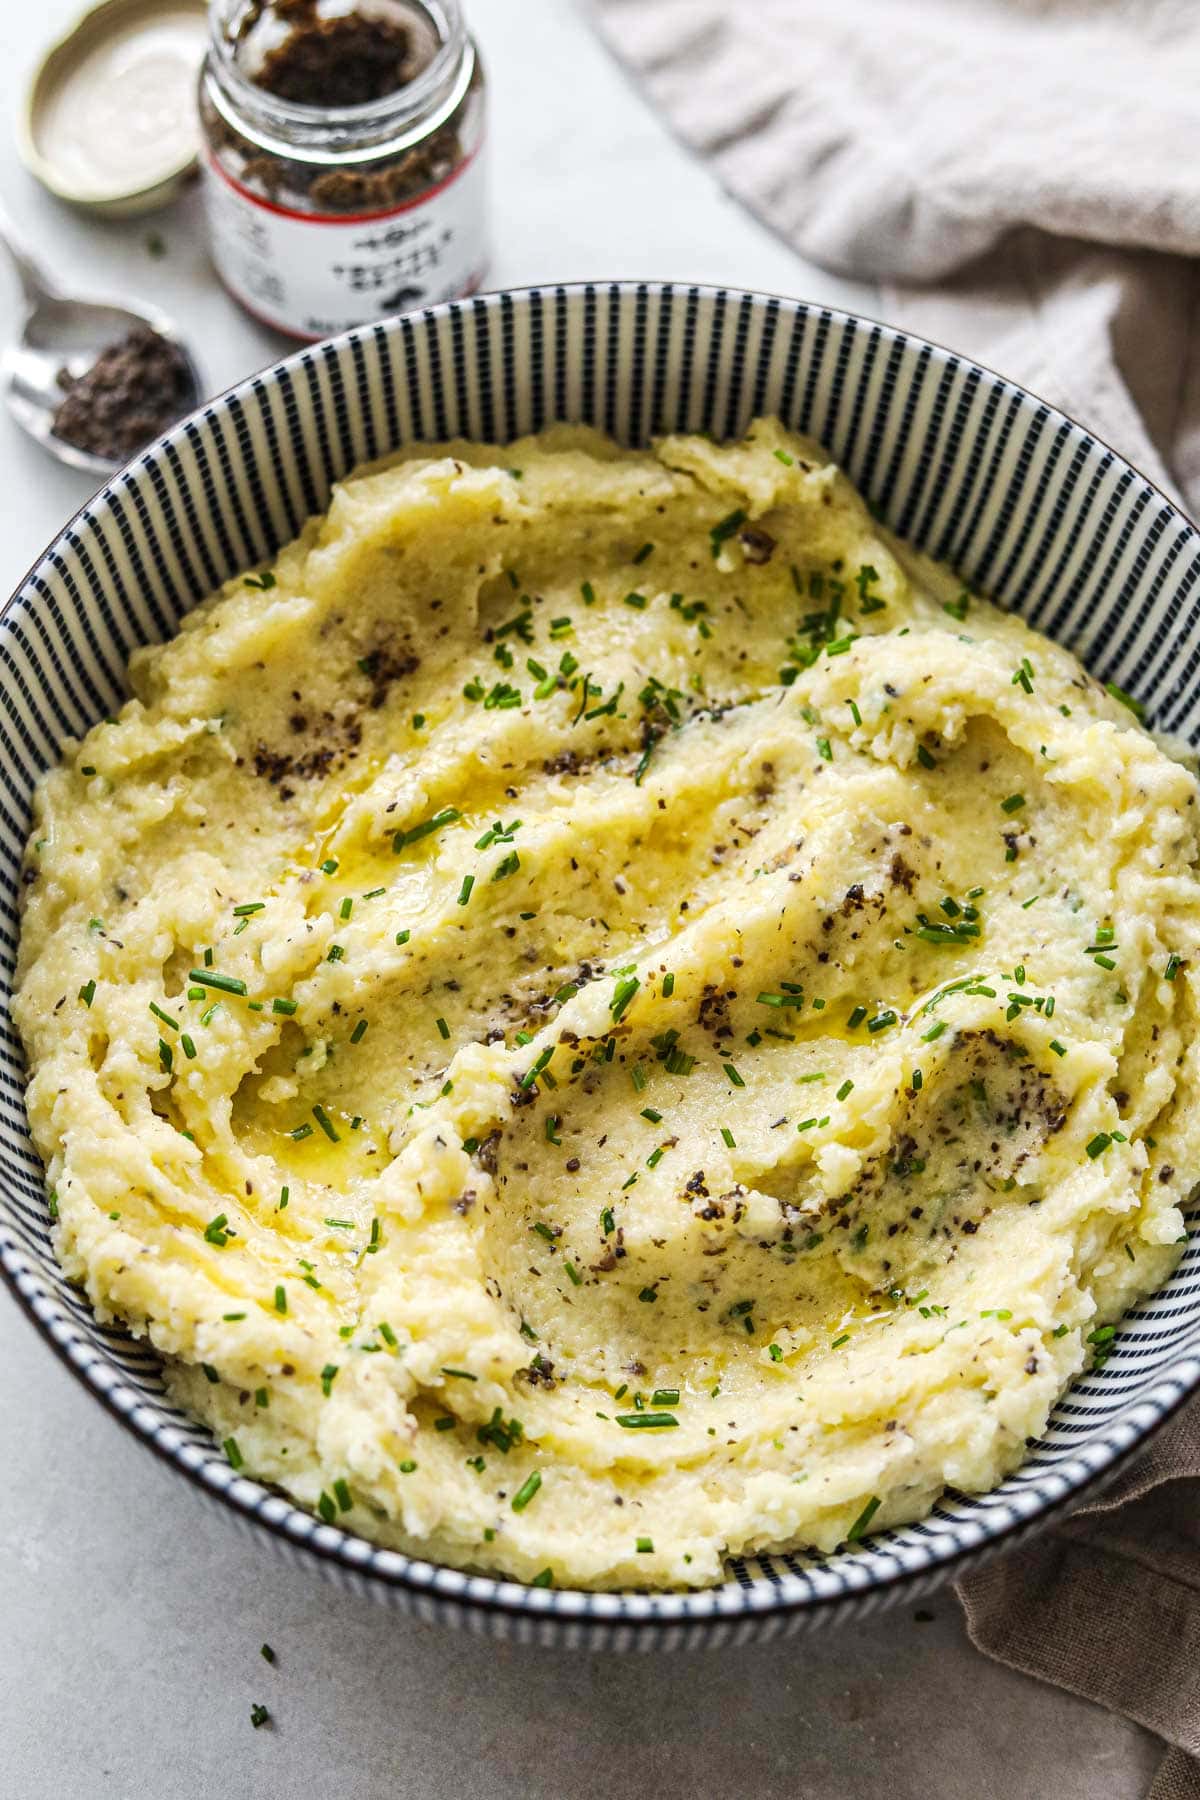 Creamy truffle mashed potatoes with swoops of melted butter on top.